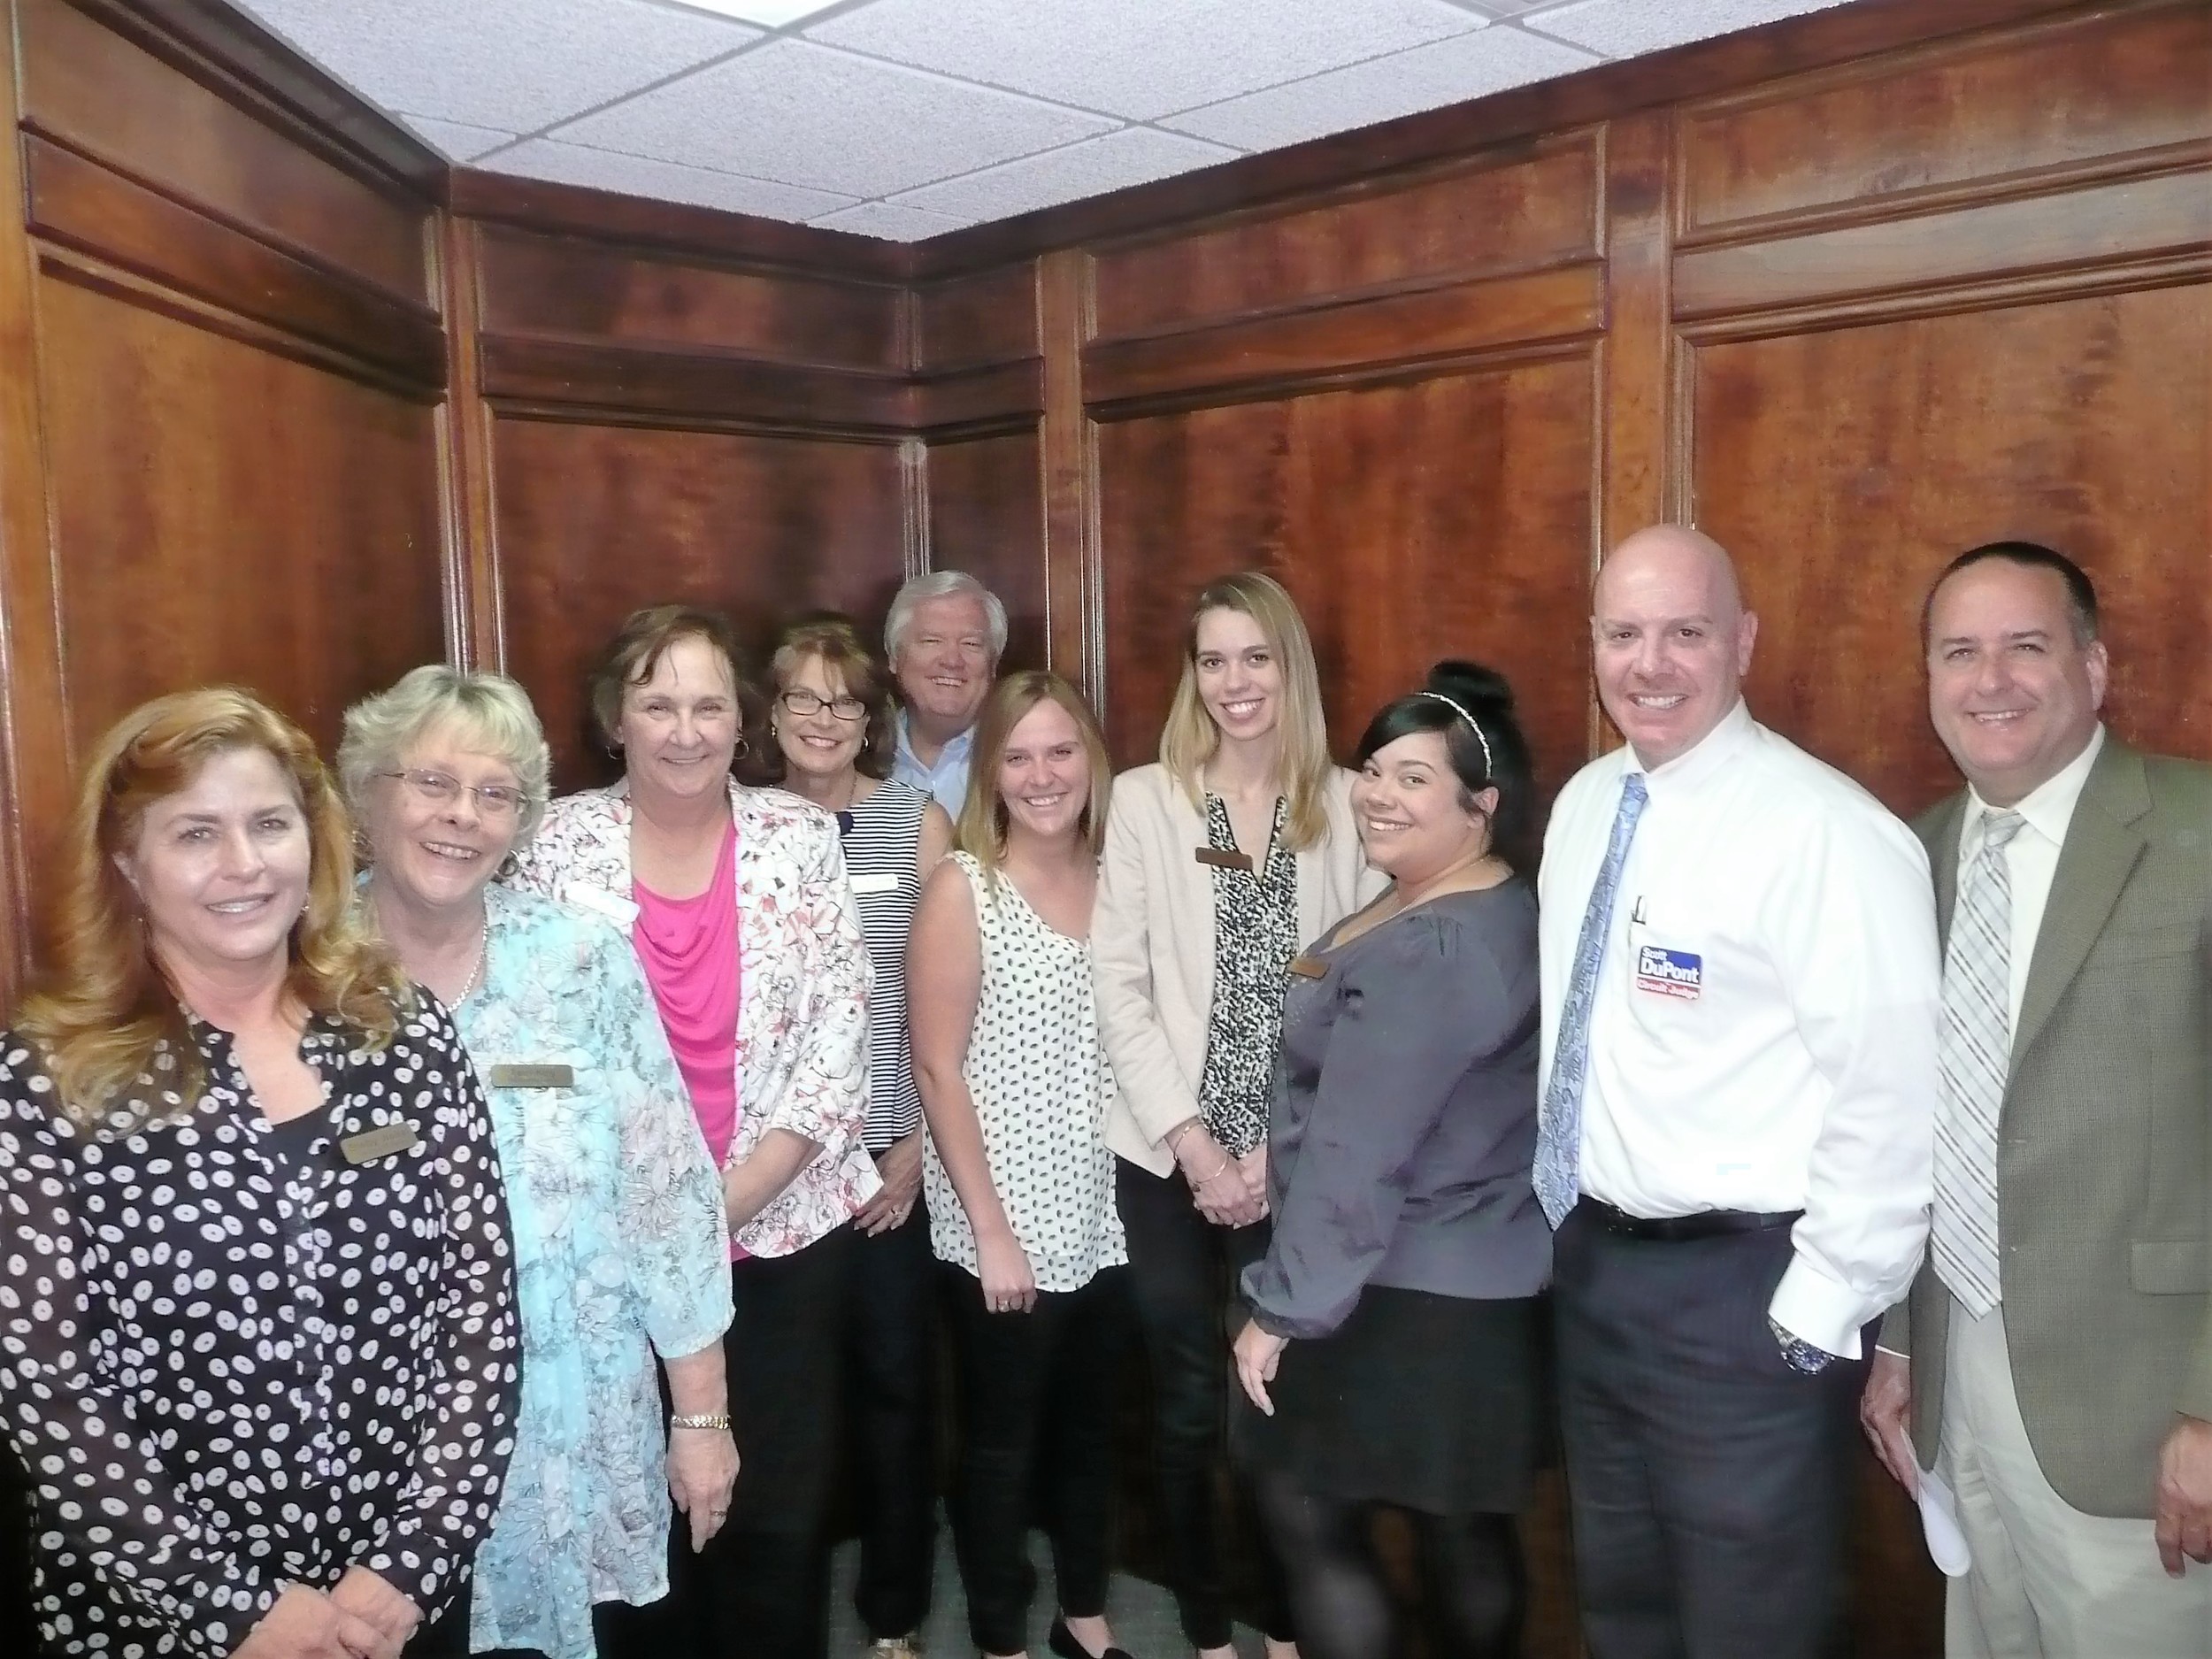 From left: Browning agency staff Shelby Weikel, Terri King, Diane Roche, Cecily Browning, Jim Browning, Taylor Barnard, Regina Morriss and Pavline Savino; Judge Scott DuPont; and Declan Reiley, vice president of economic development for the St. Johns County Chamber of Commerce.